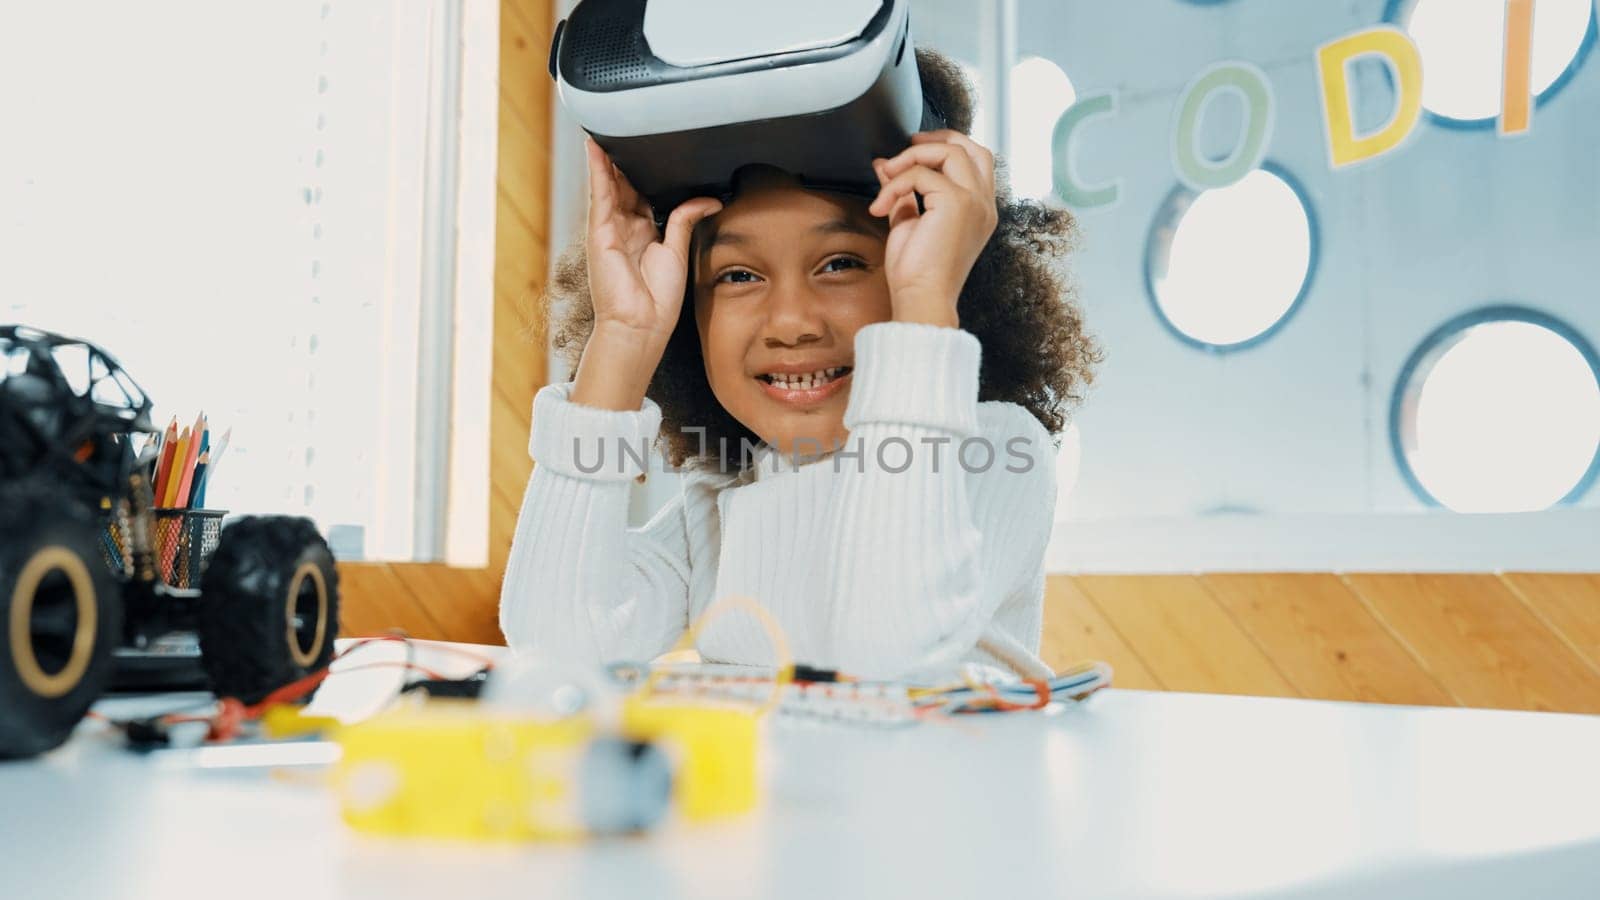 African girl taking off VR glass or head set while looking at camera. Erudition. by biancoblue